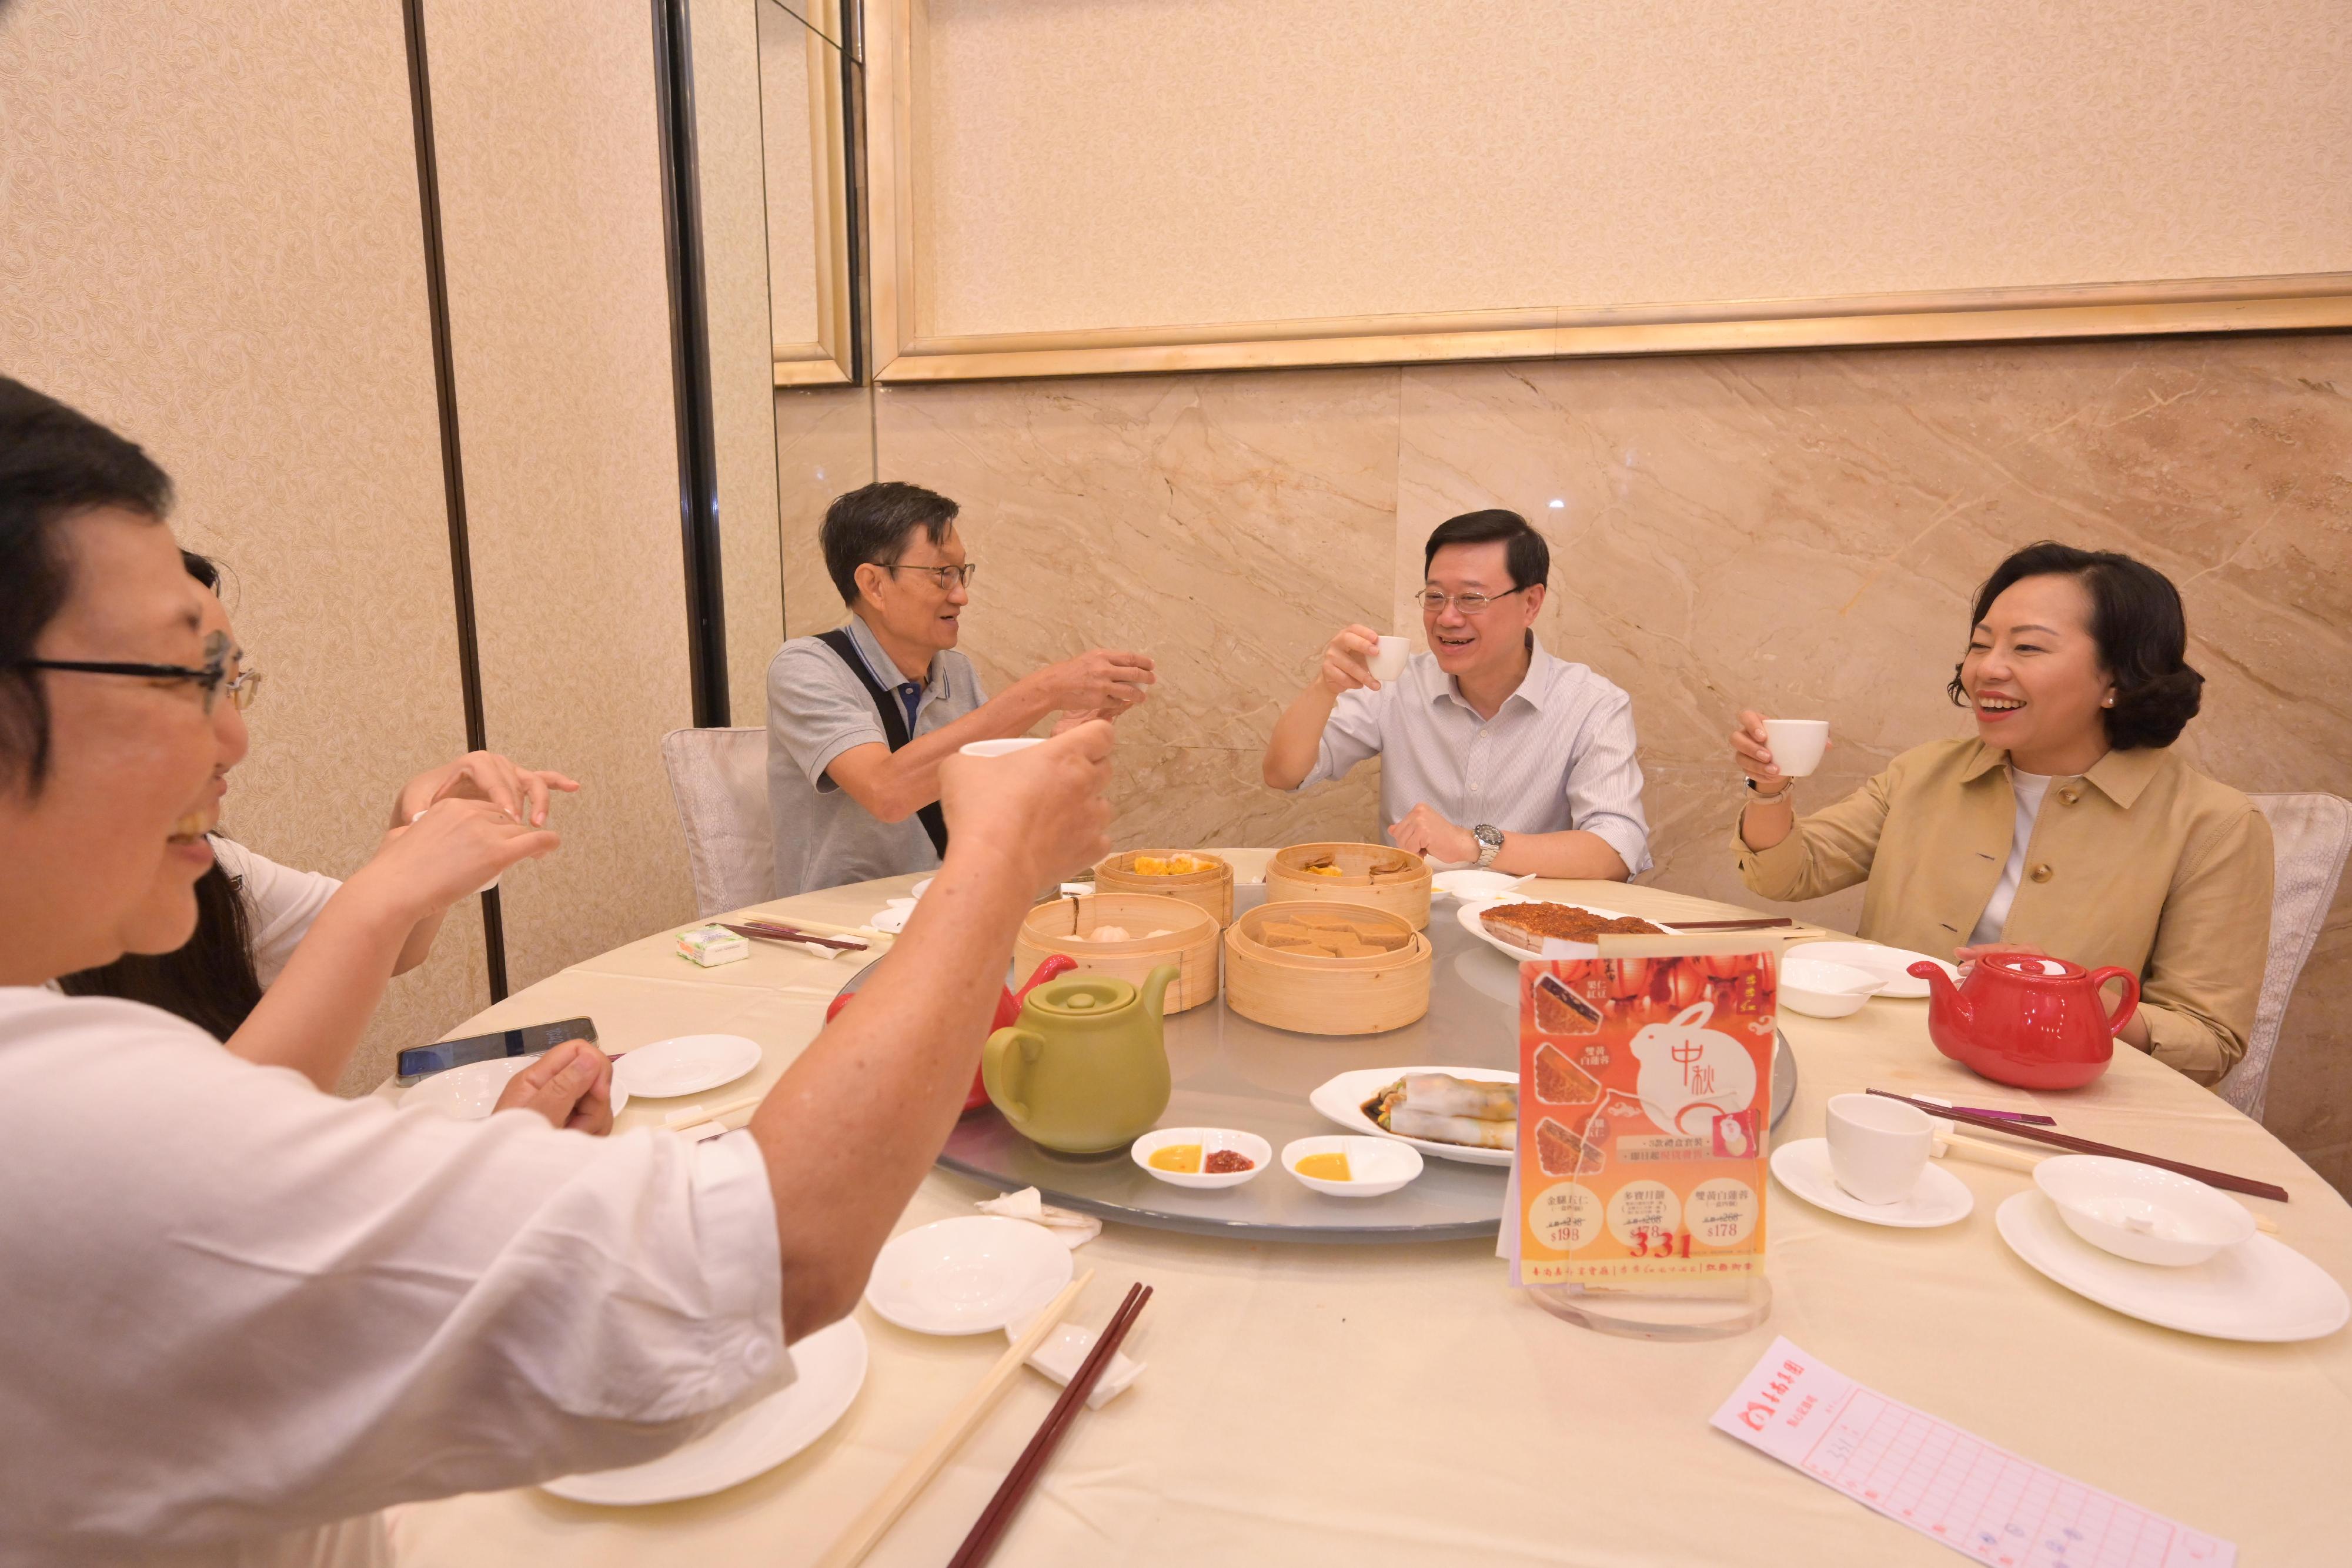 The Chief Executive, Mr John Lee, visited Yuen Long to gather public views on the upcoming Policy Address today (September 17). Photo shows Mr Lee (second right), and the Secretary for Home and Youth Affairs, Miss Alice Mak (first right), interacting with members of the public and listening to their views on the upcoming Policy Address.